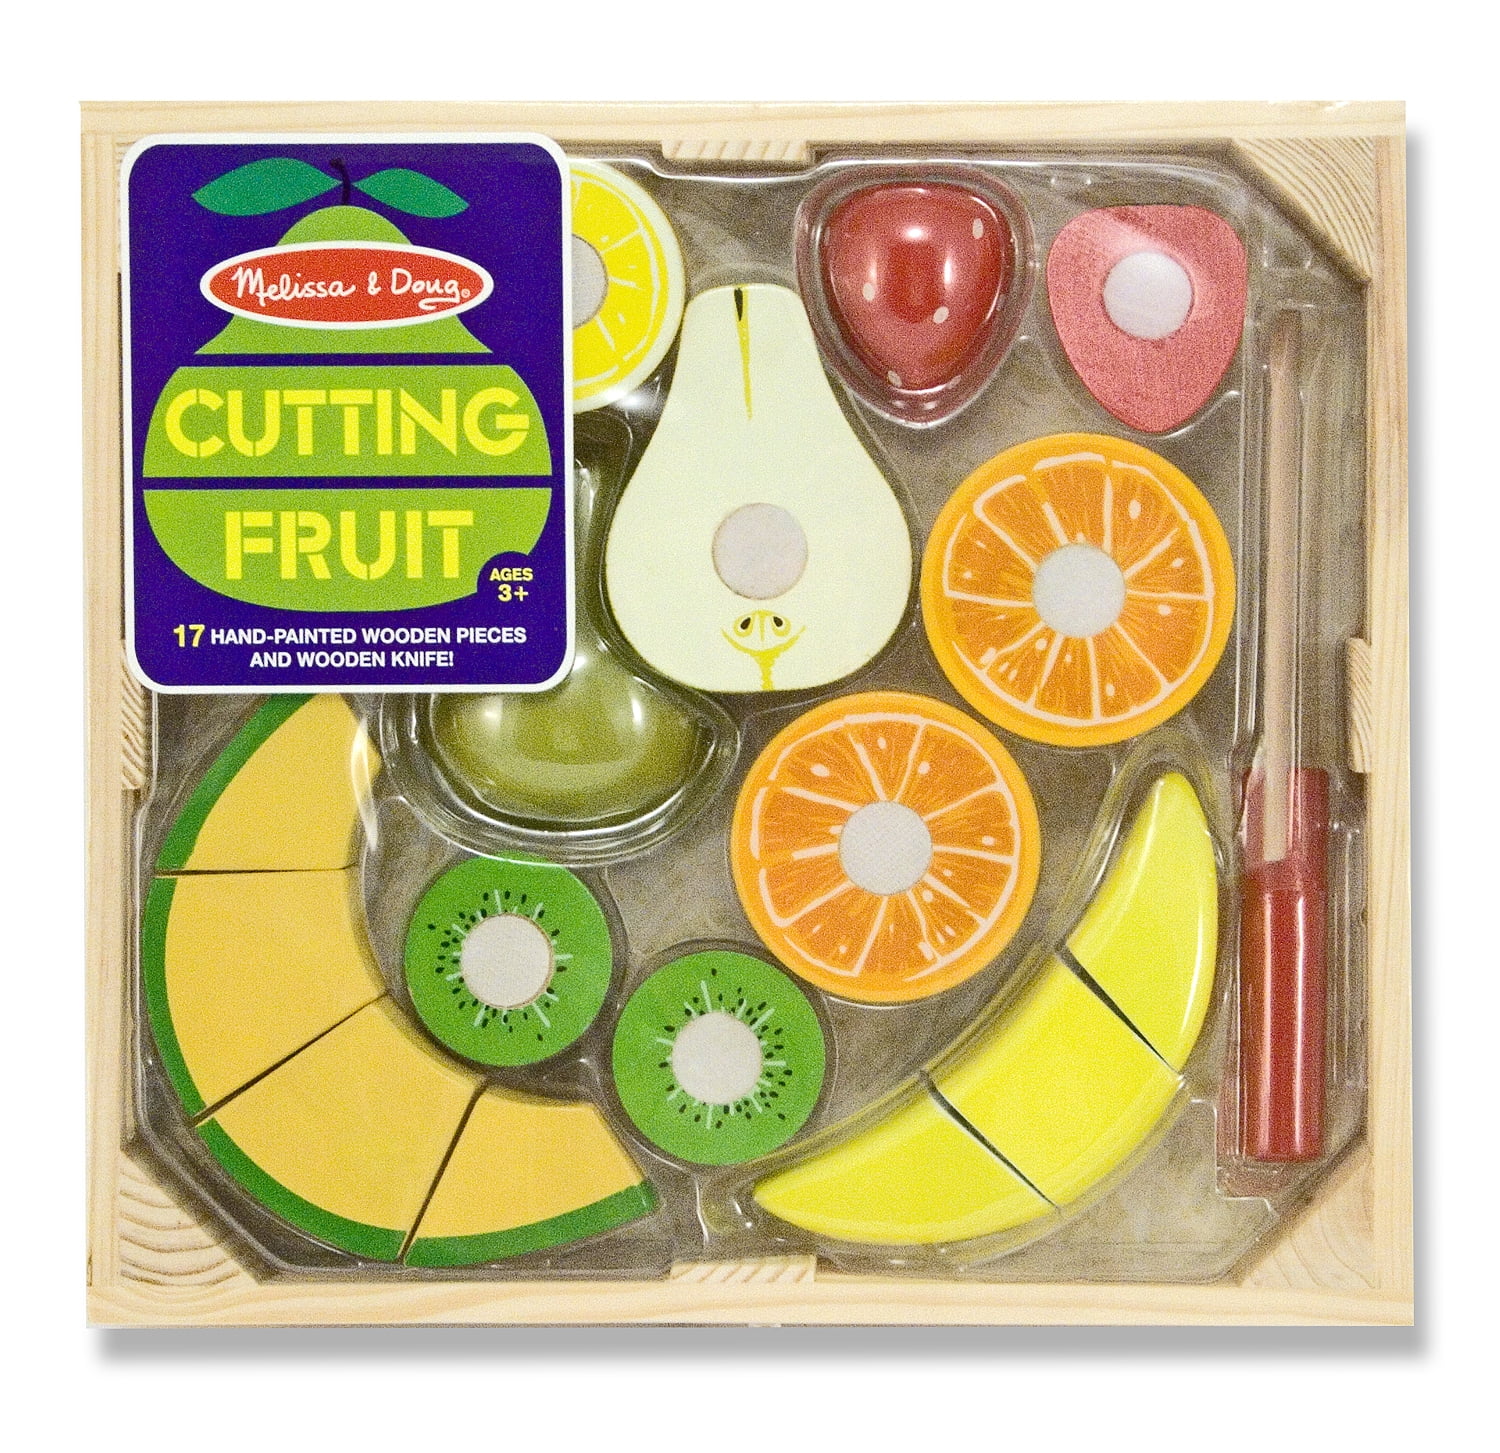 melissa and doug wooden cutting food